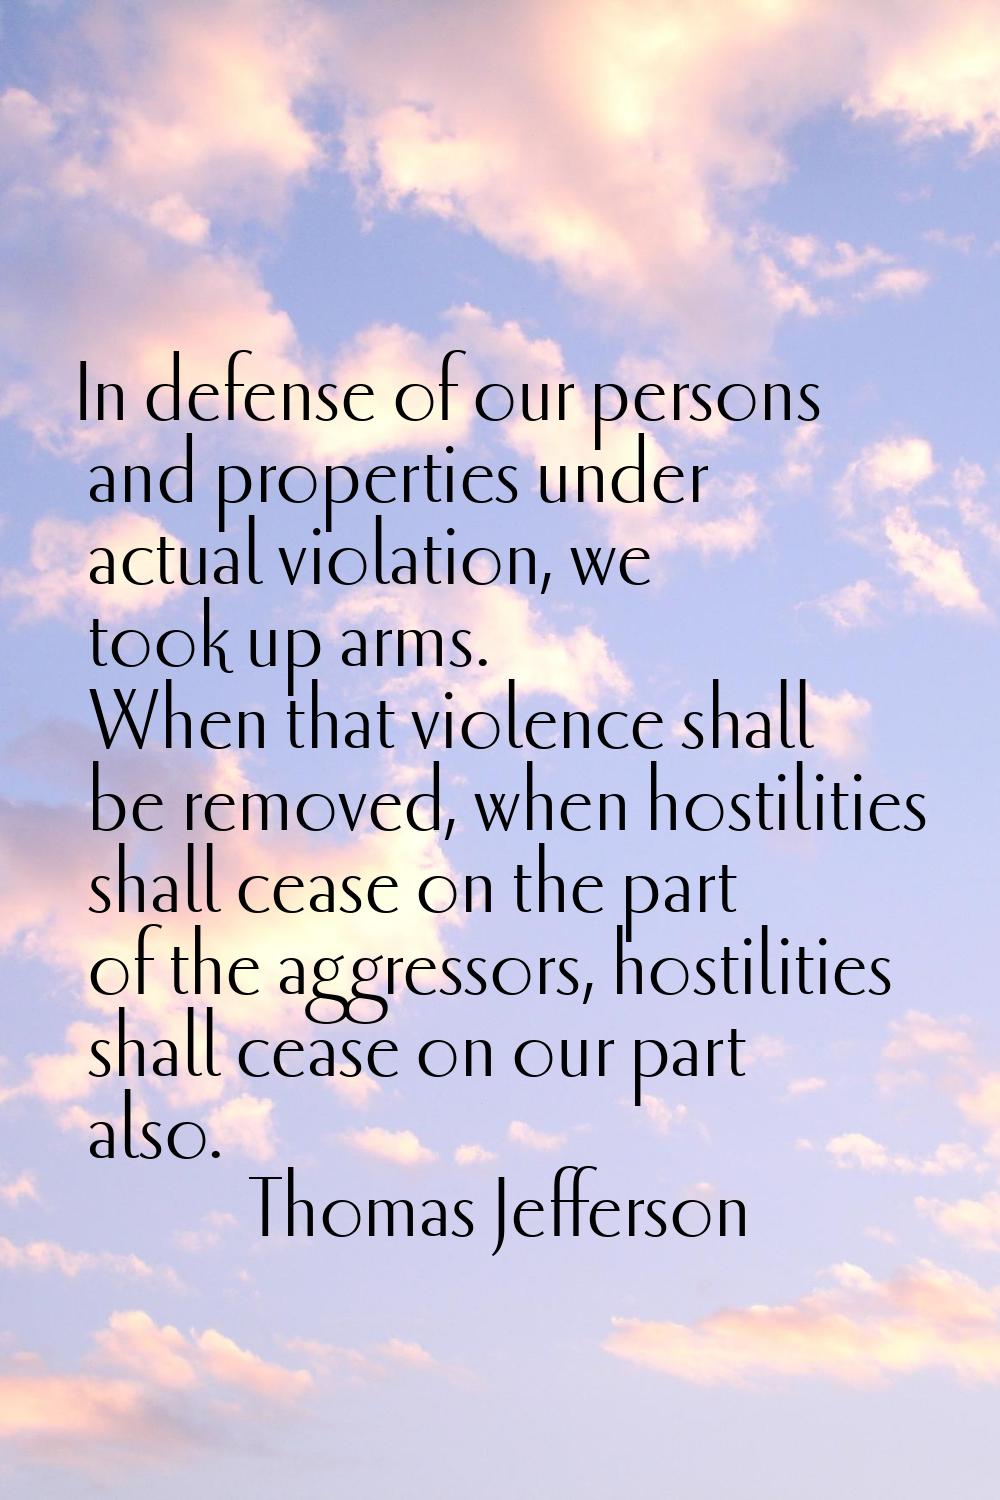 In defense of our persons and properties under actual violation, we took up arms. When that violenc